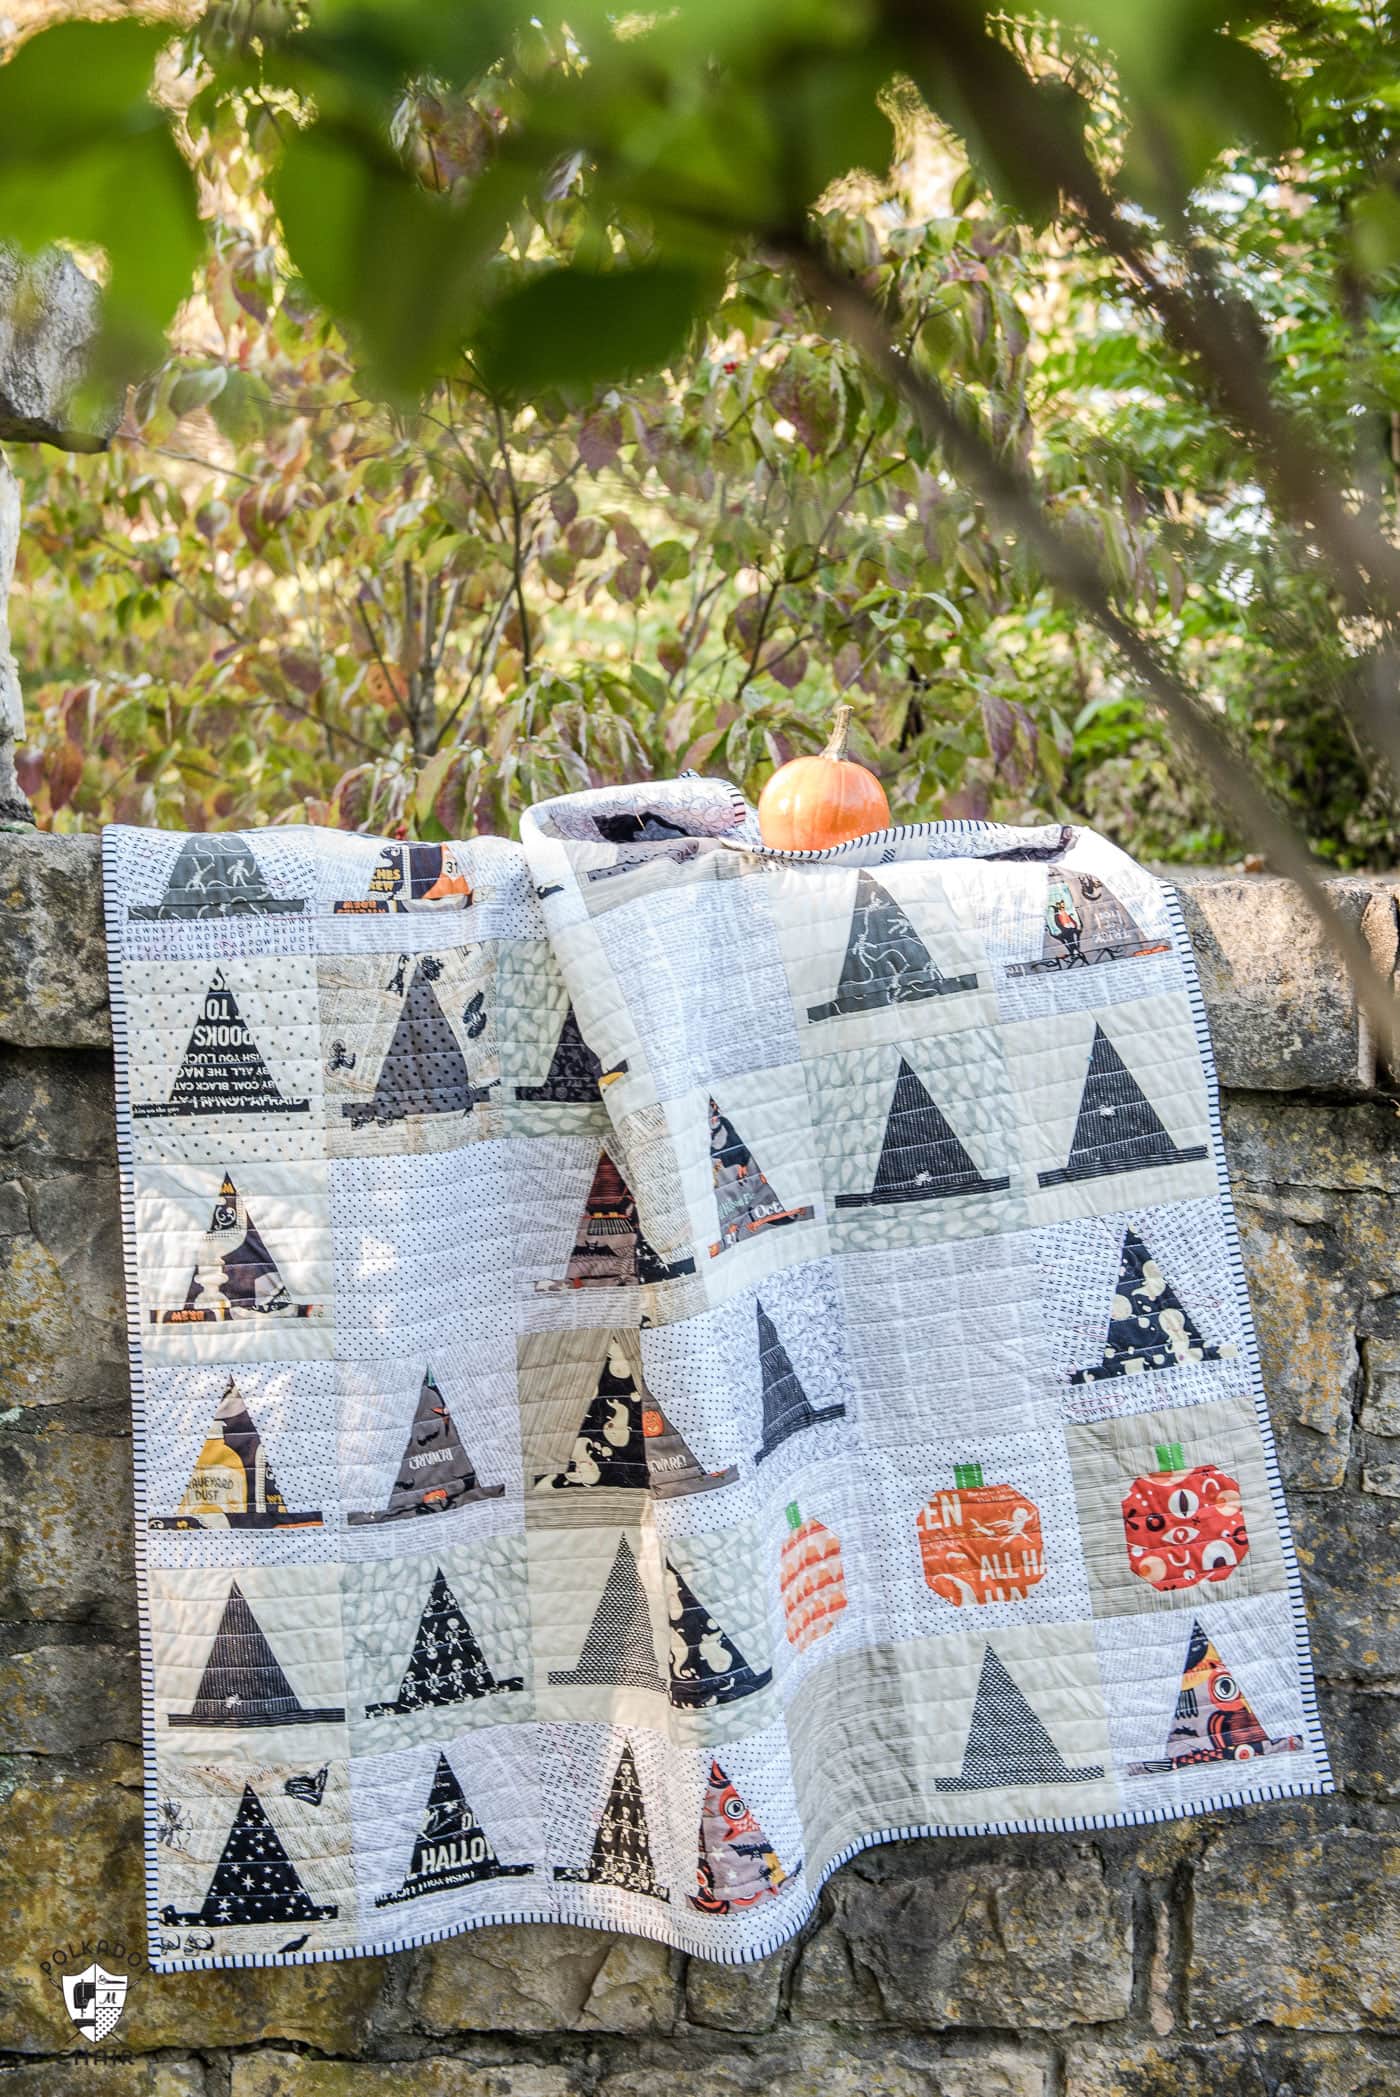 Halloween Haberdashery Quilt by Melissa Mortenson - a cute Witch's Hat Halloween Quilt pattern hanging on stone wall with pumpkin